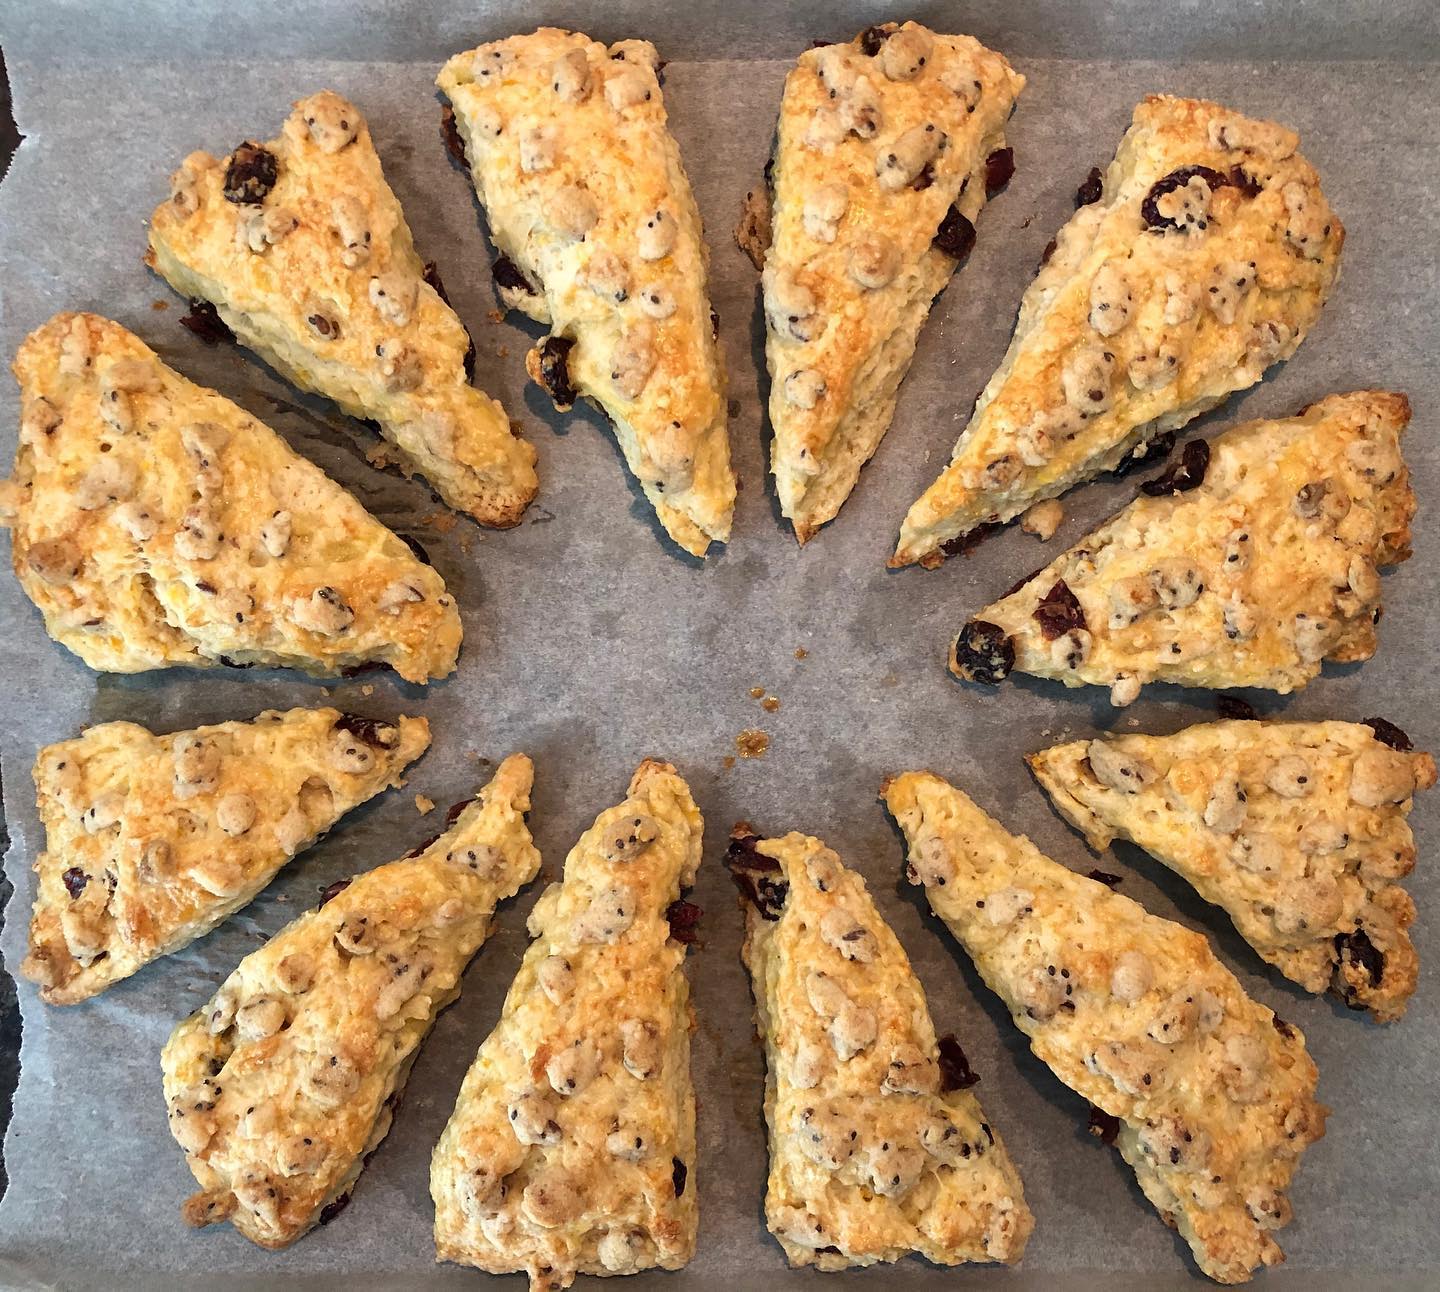 Today’s quarantine project: cranberry-orange scones. Soaked the dried cranberries in rum and milk before mixing in, and topped with granola crumble. #quarantinebaking #scones